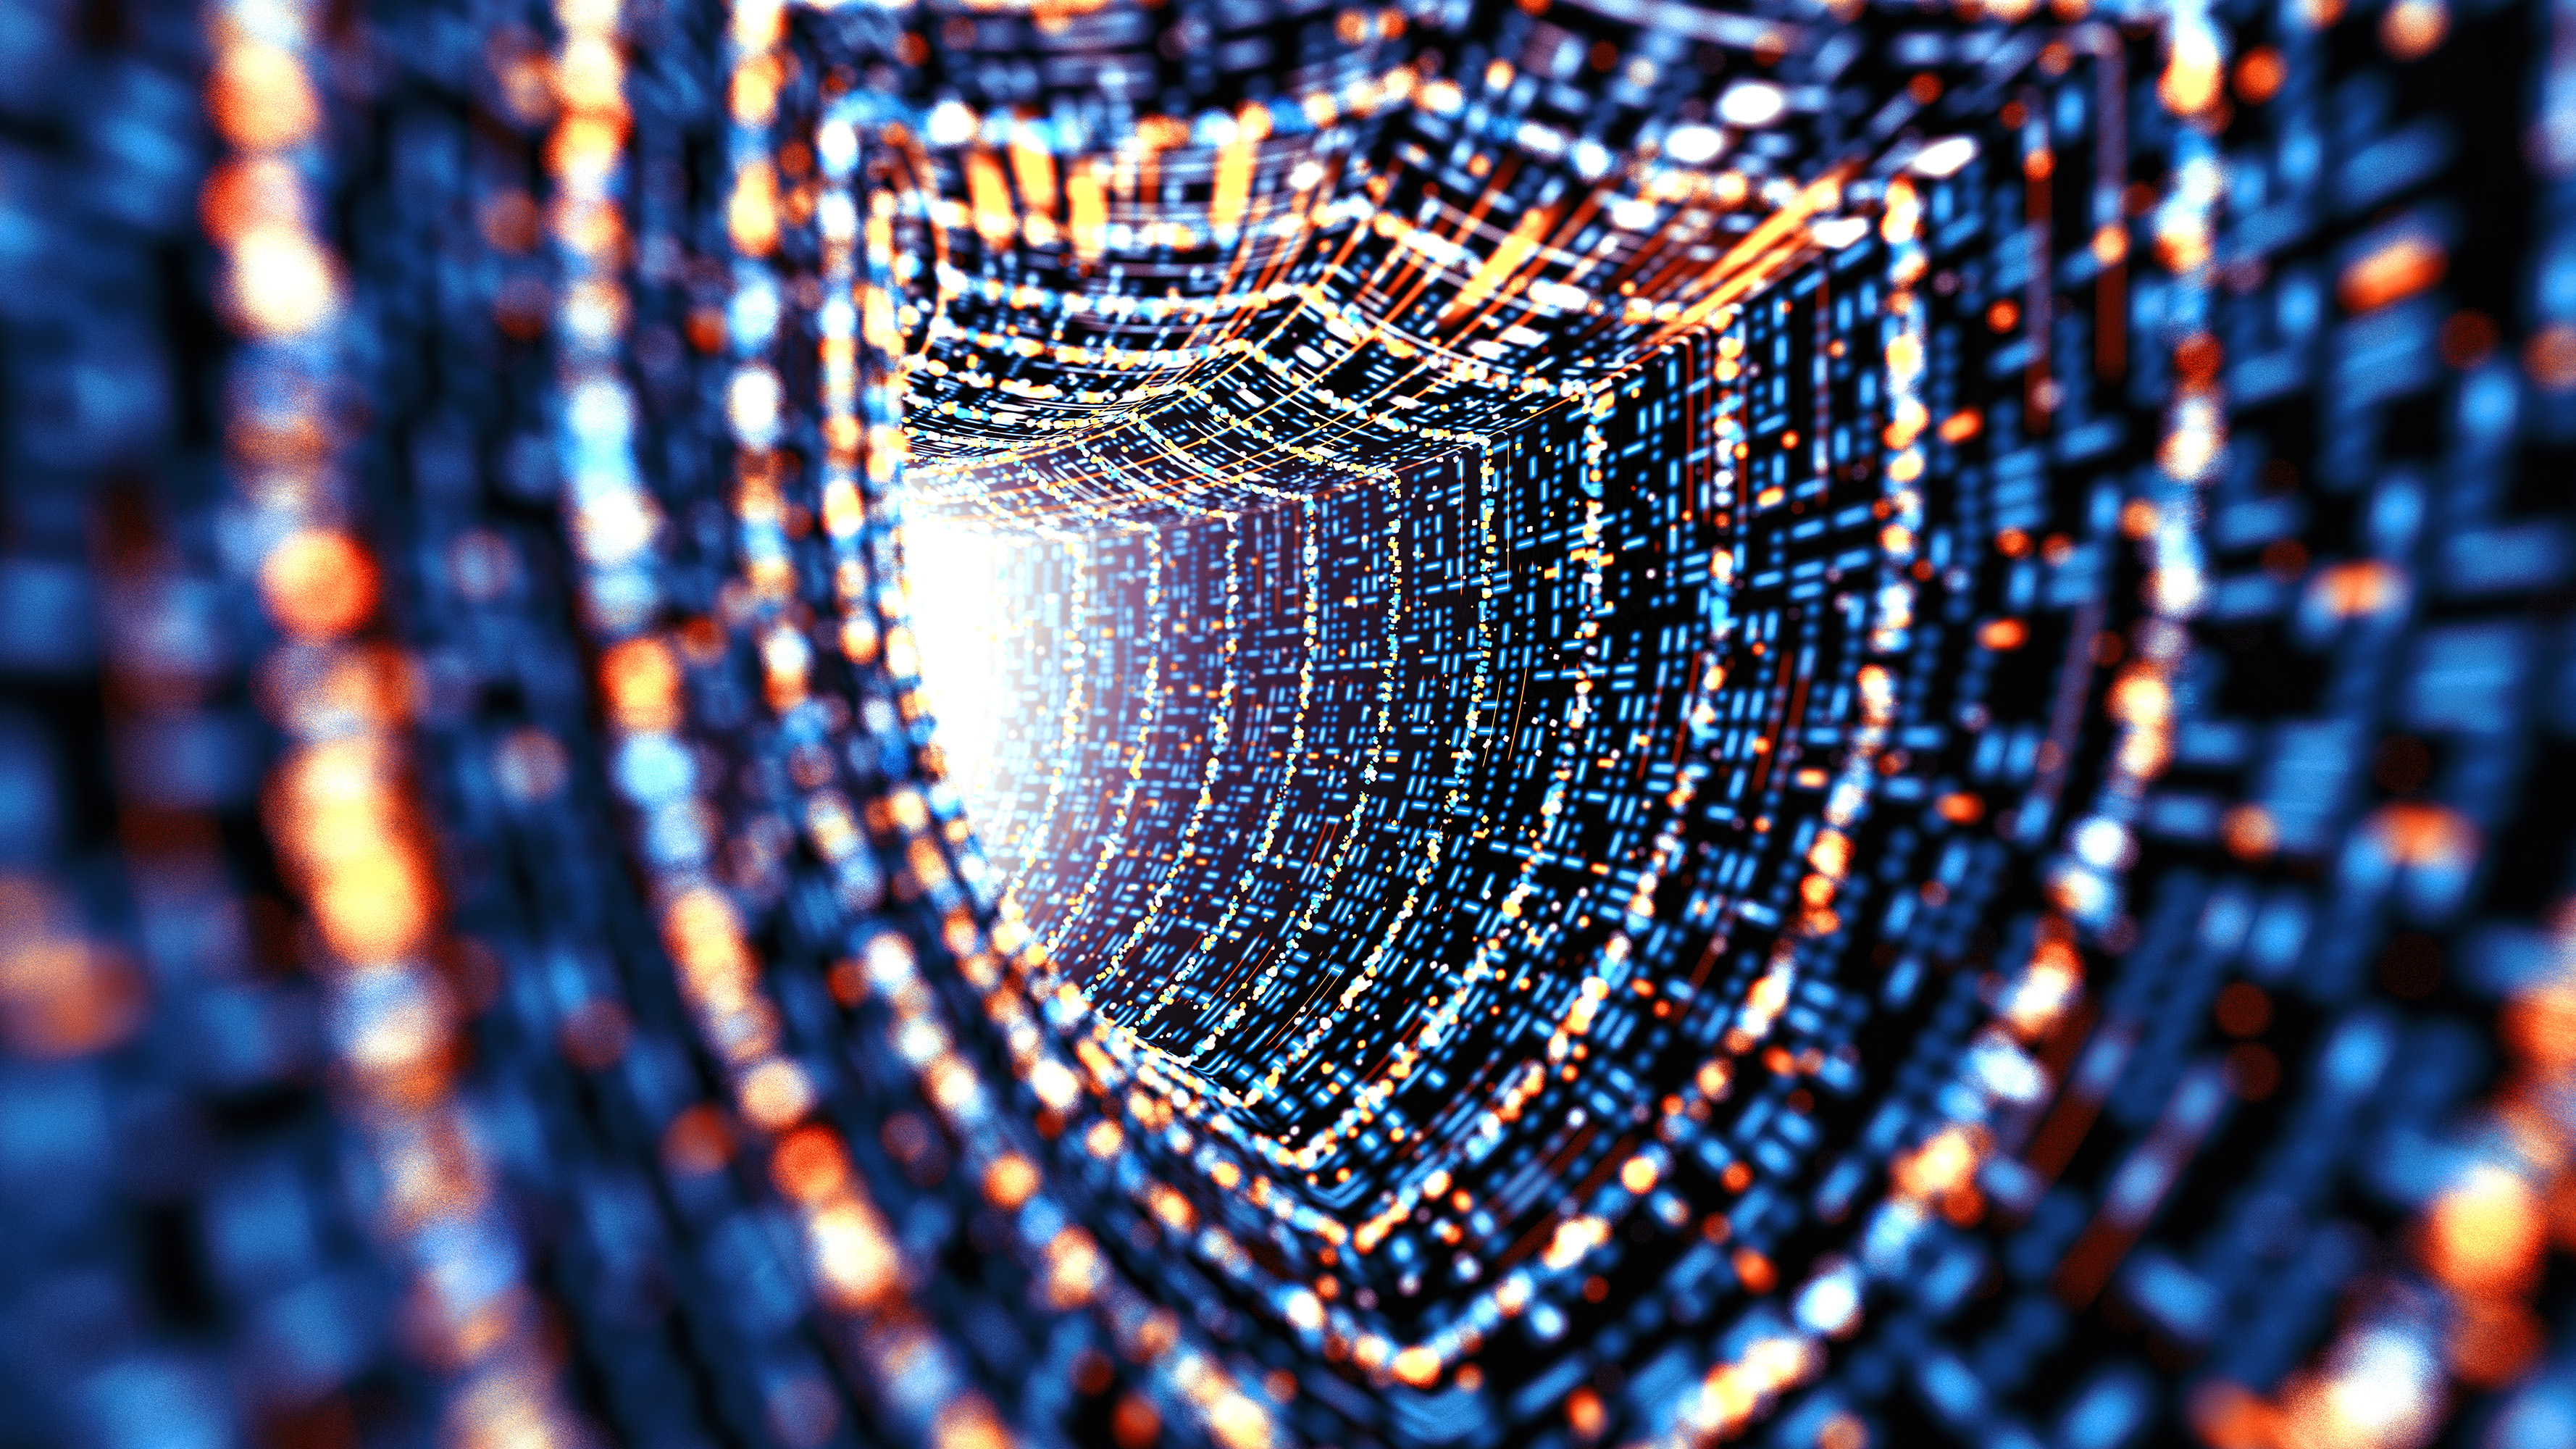 A CGI render of a shield-shaped tunnel to represent AI cyber security. A light can be seen at the end of the tunnel, which is formed from orange and blue energy against a black background.